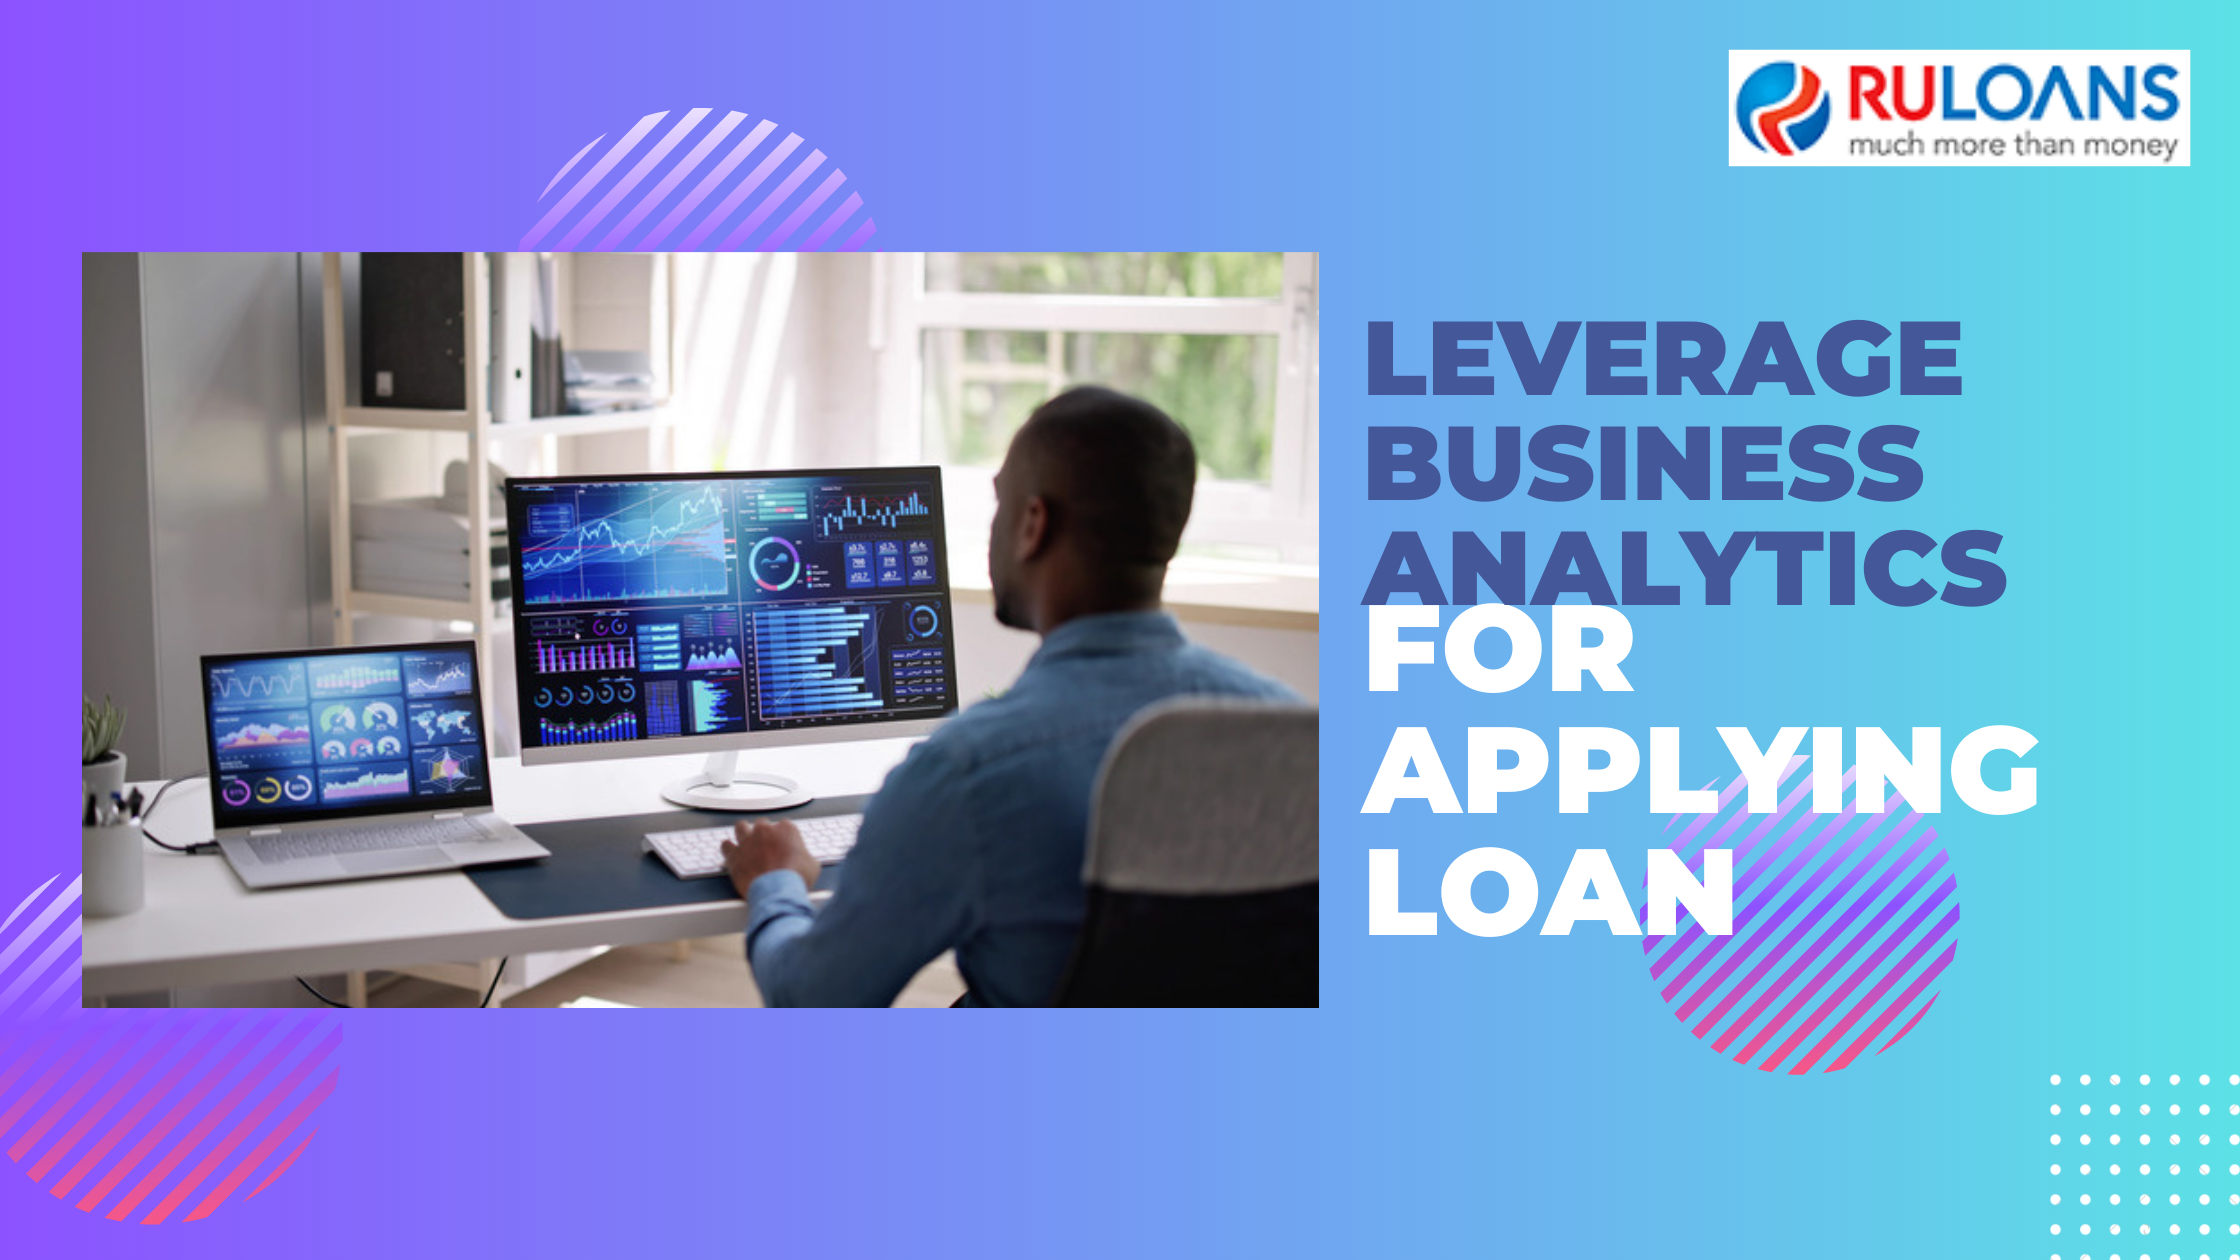 How to Leverage Business Analytics when Applying for a Loan